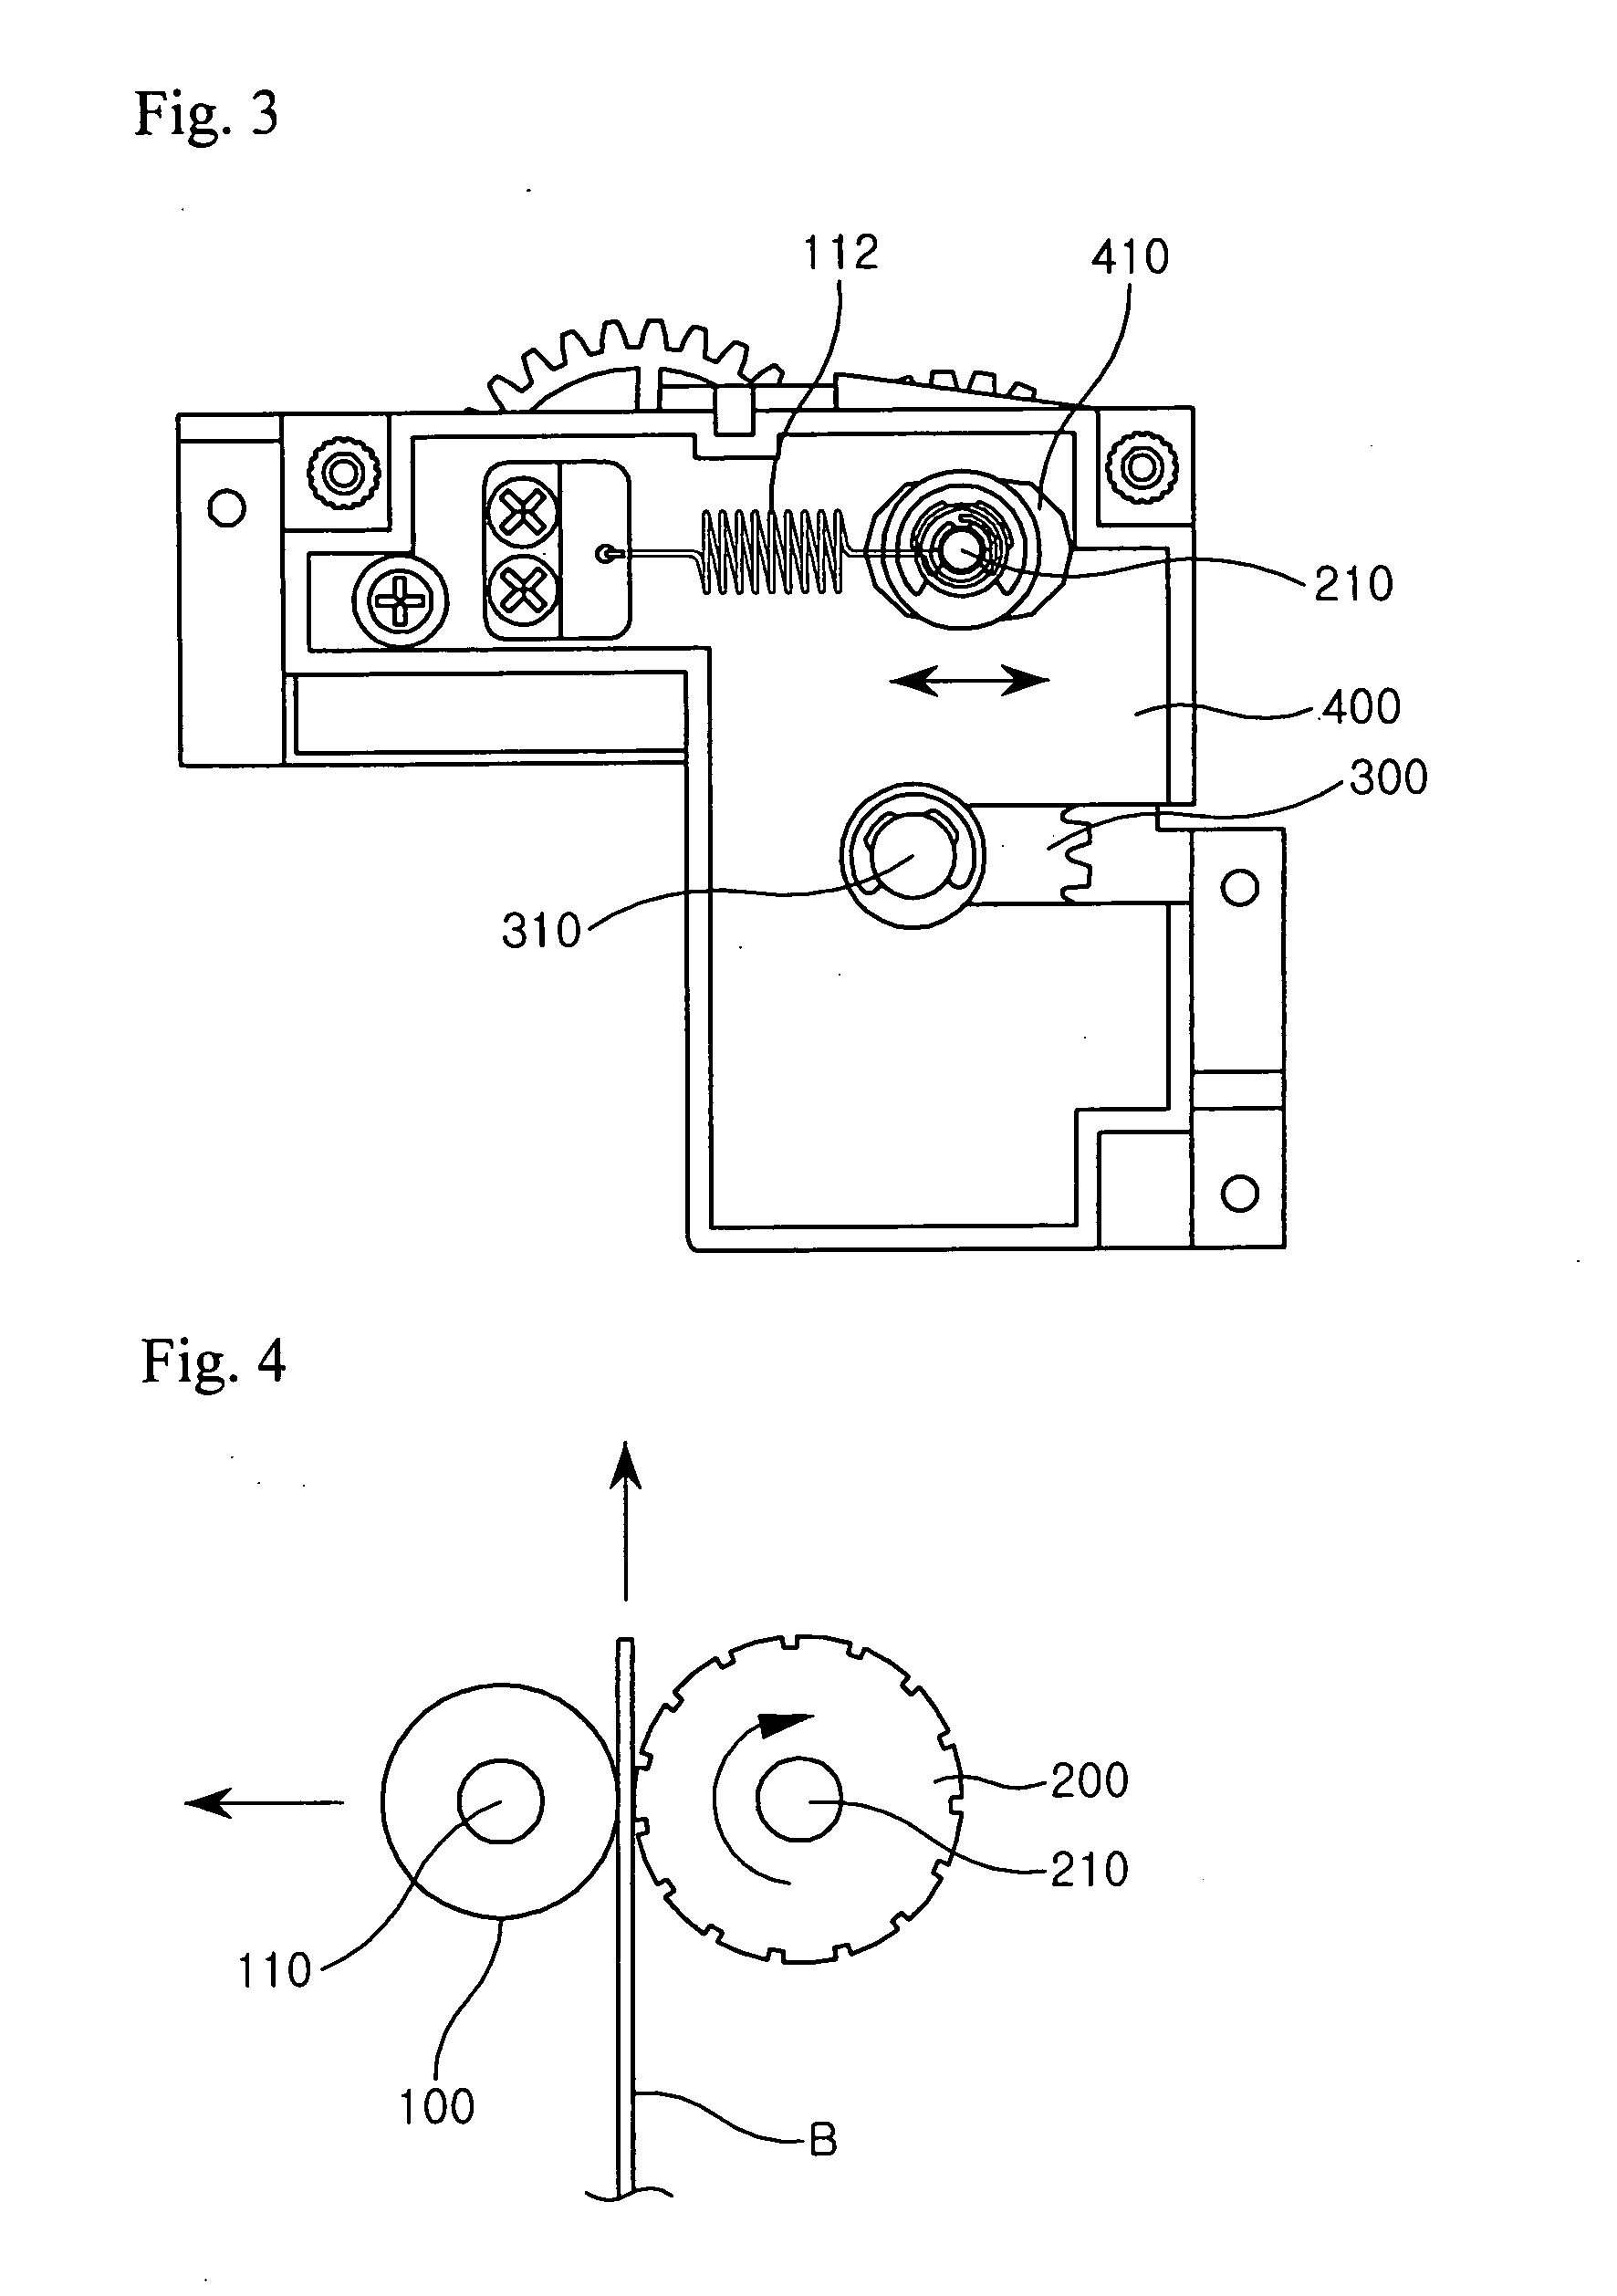 Bill separator using frictional force